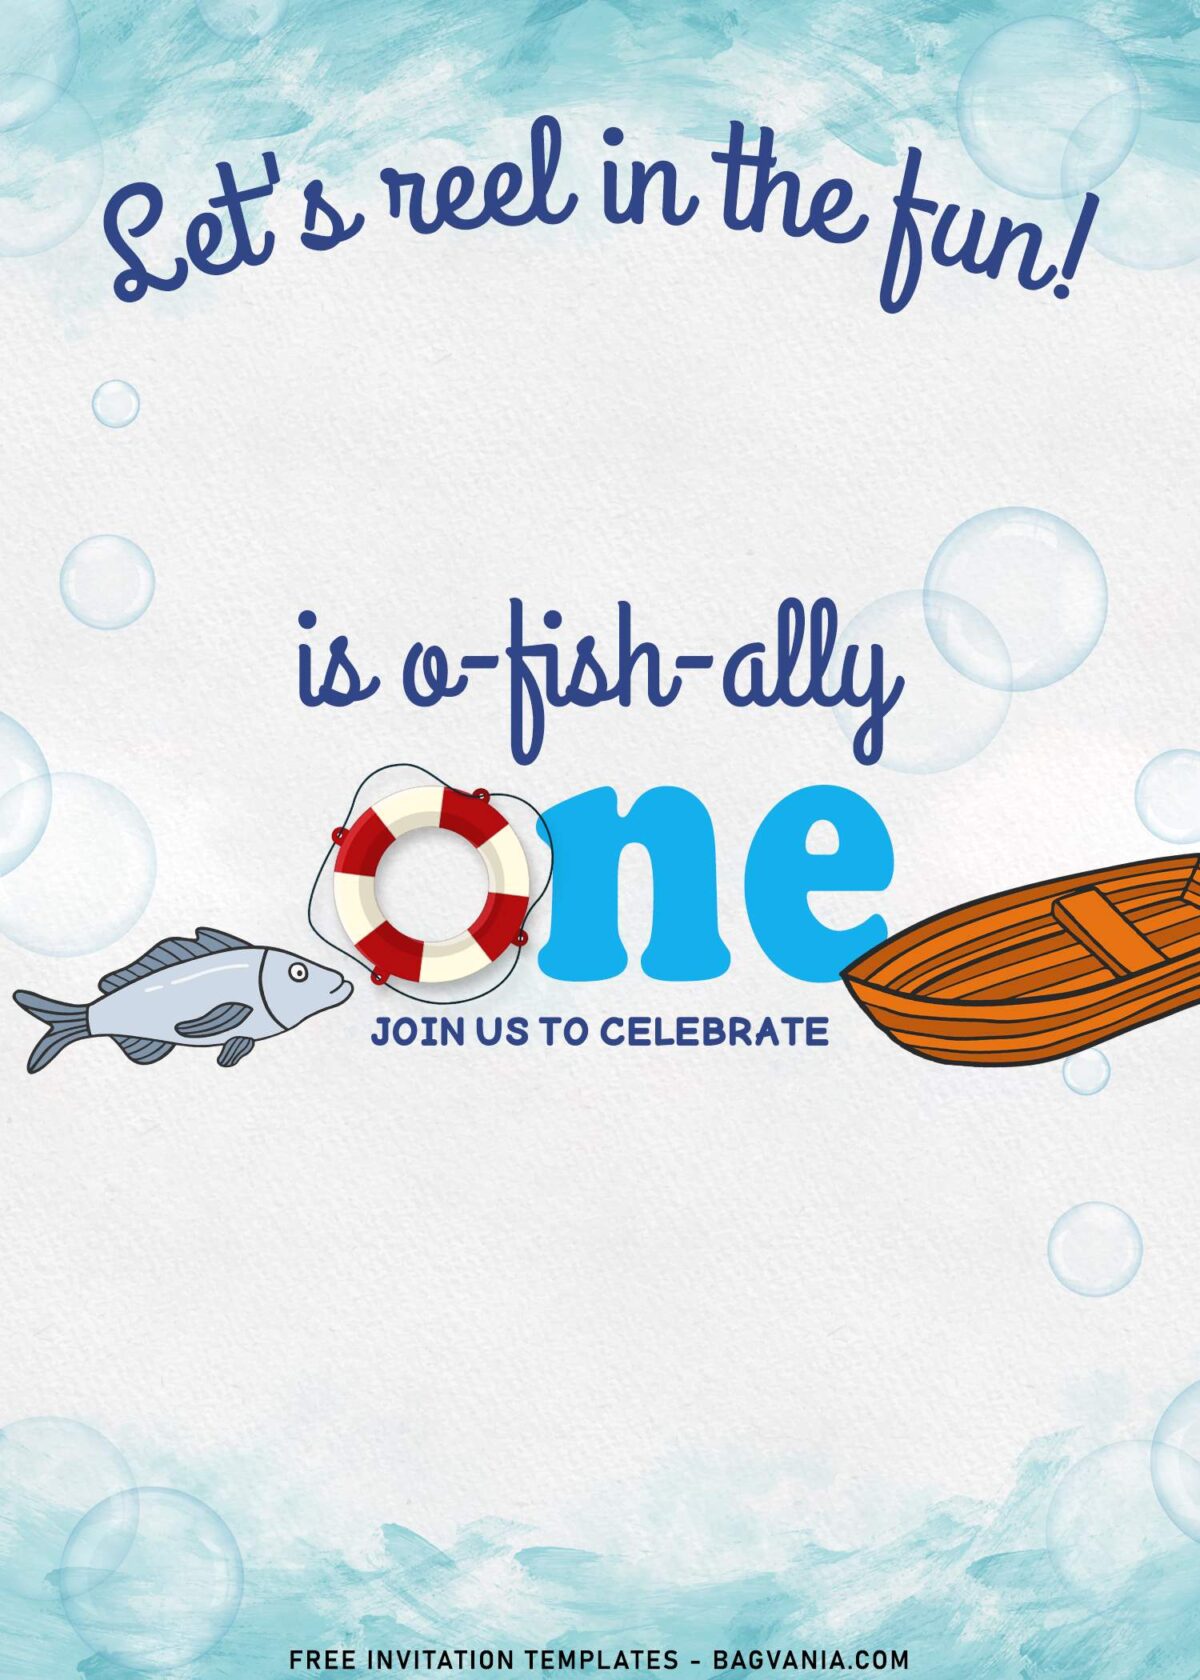 10+ Cute Fishing Birthday Invitation Templates For Your Little Fisherman with fishing boat